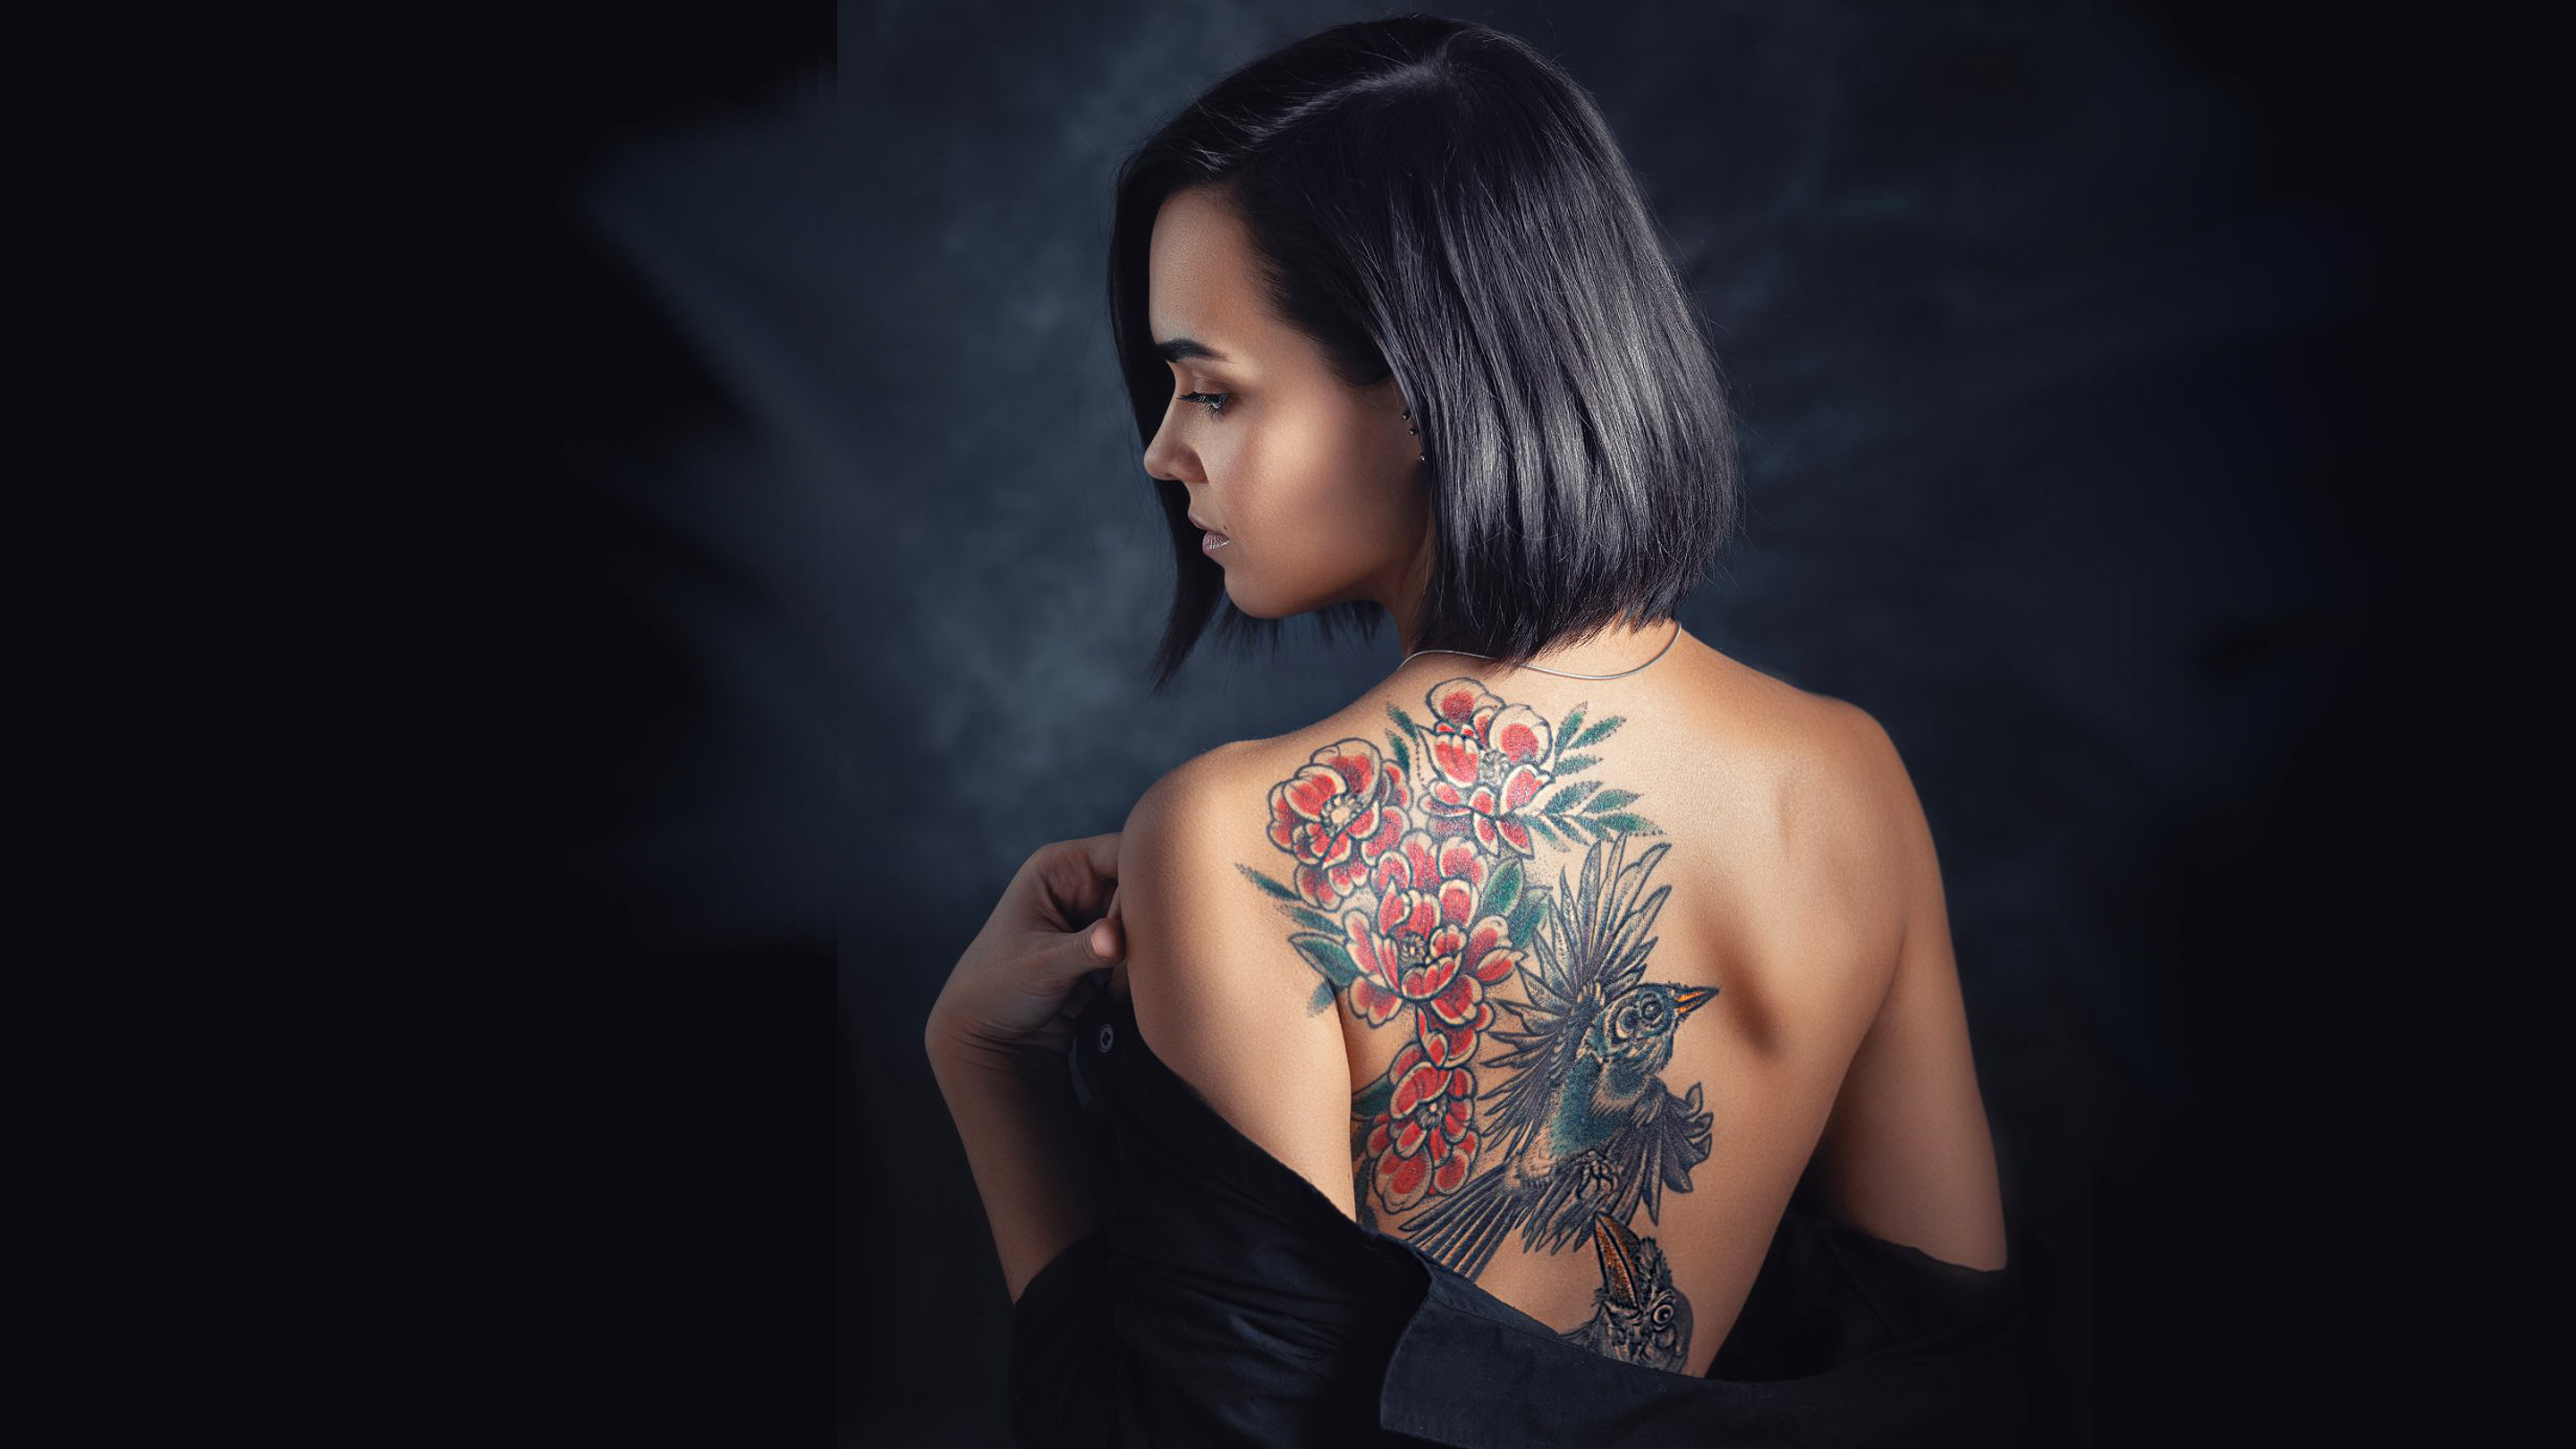 Beautiful dark-haired girl with short hair shows off her tattoo on her back